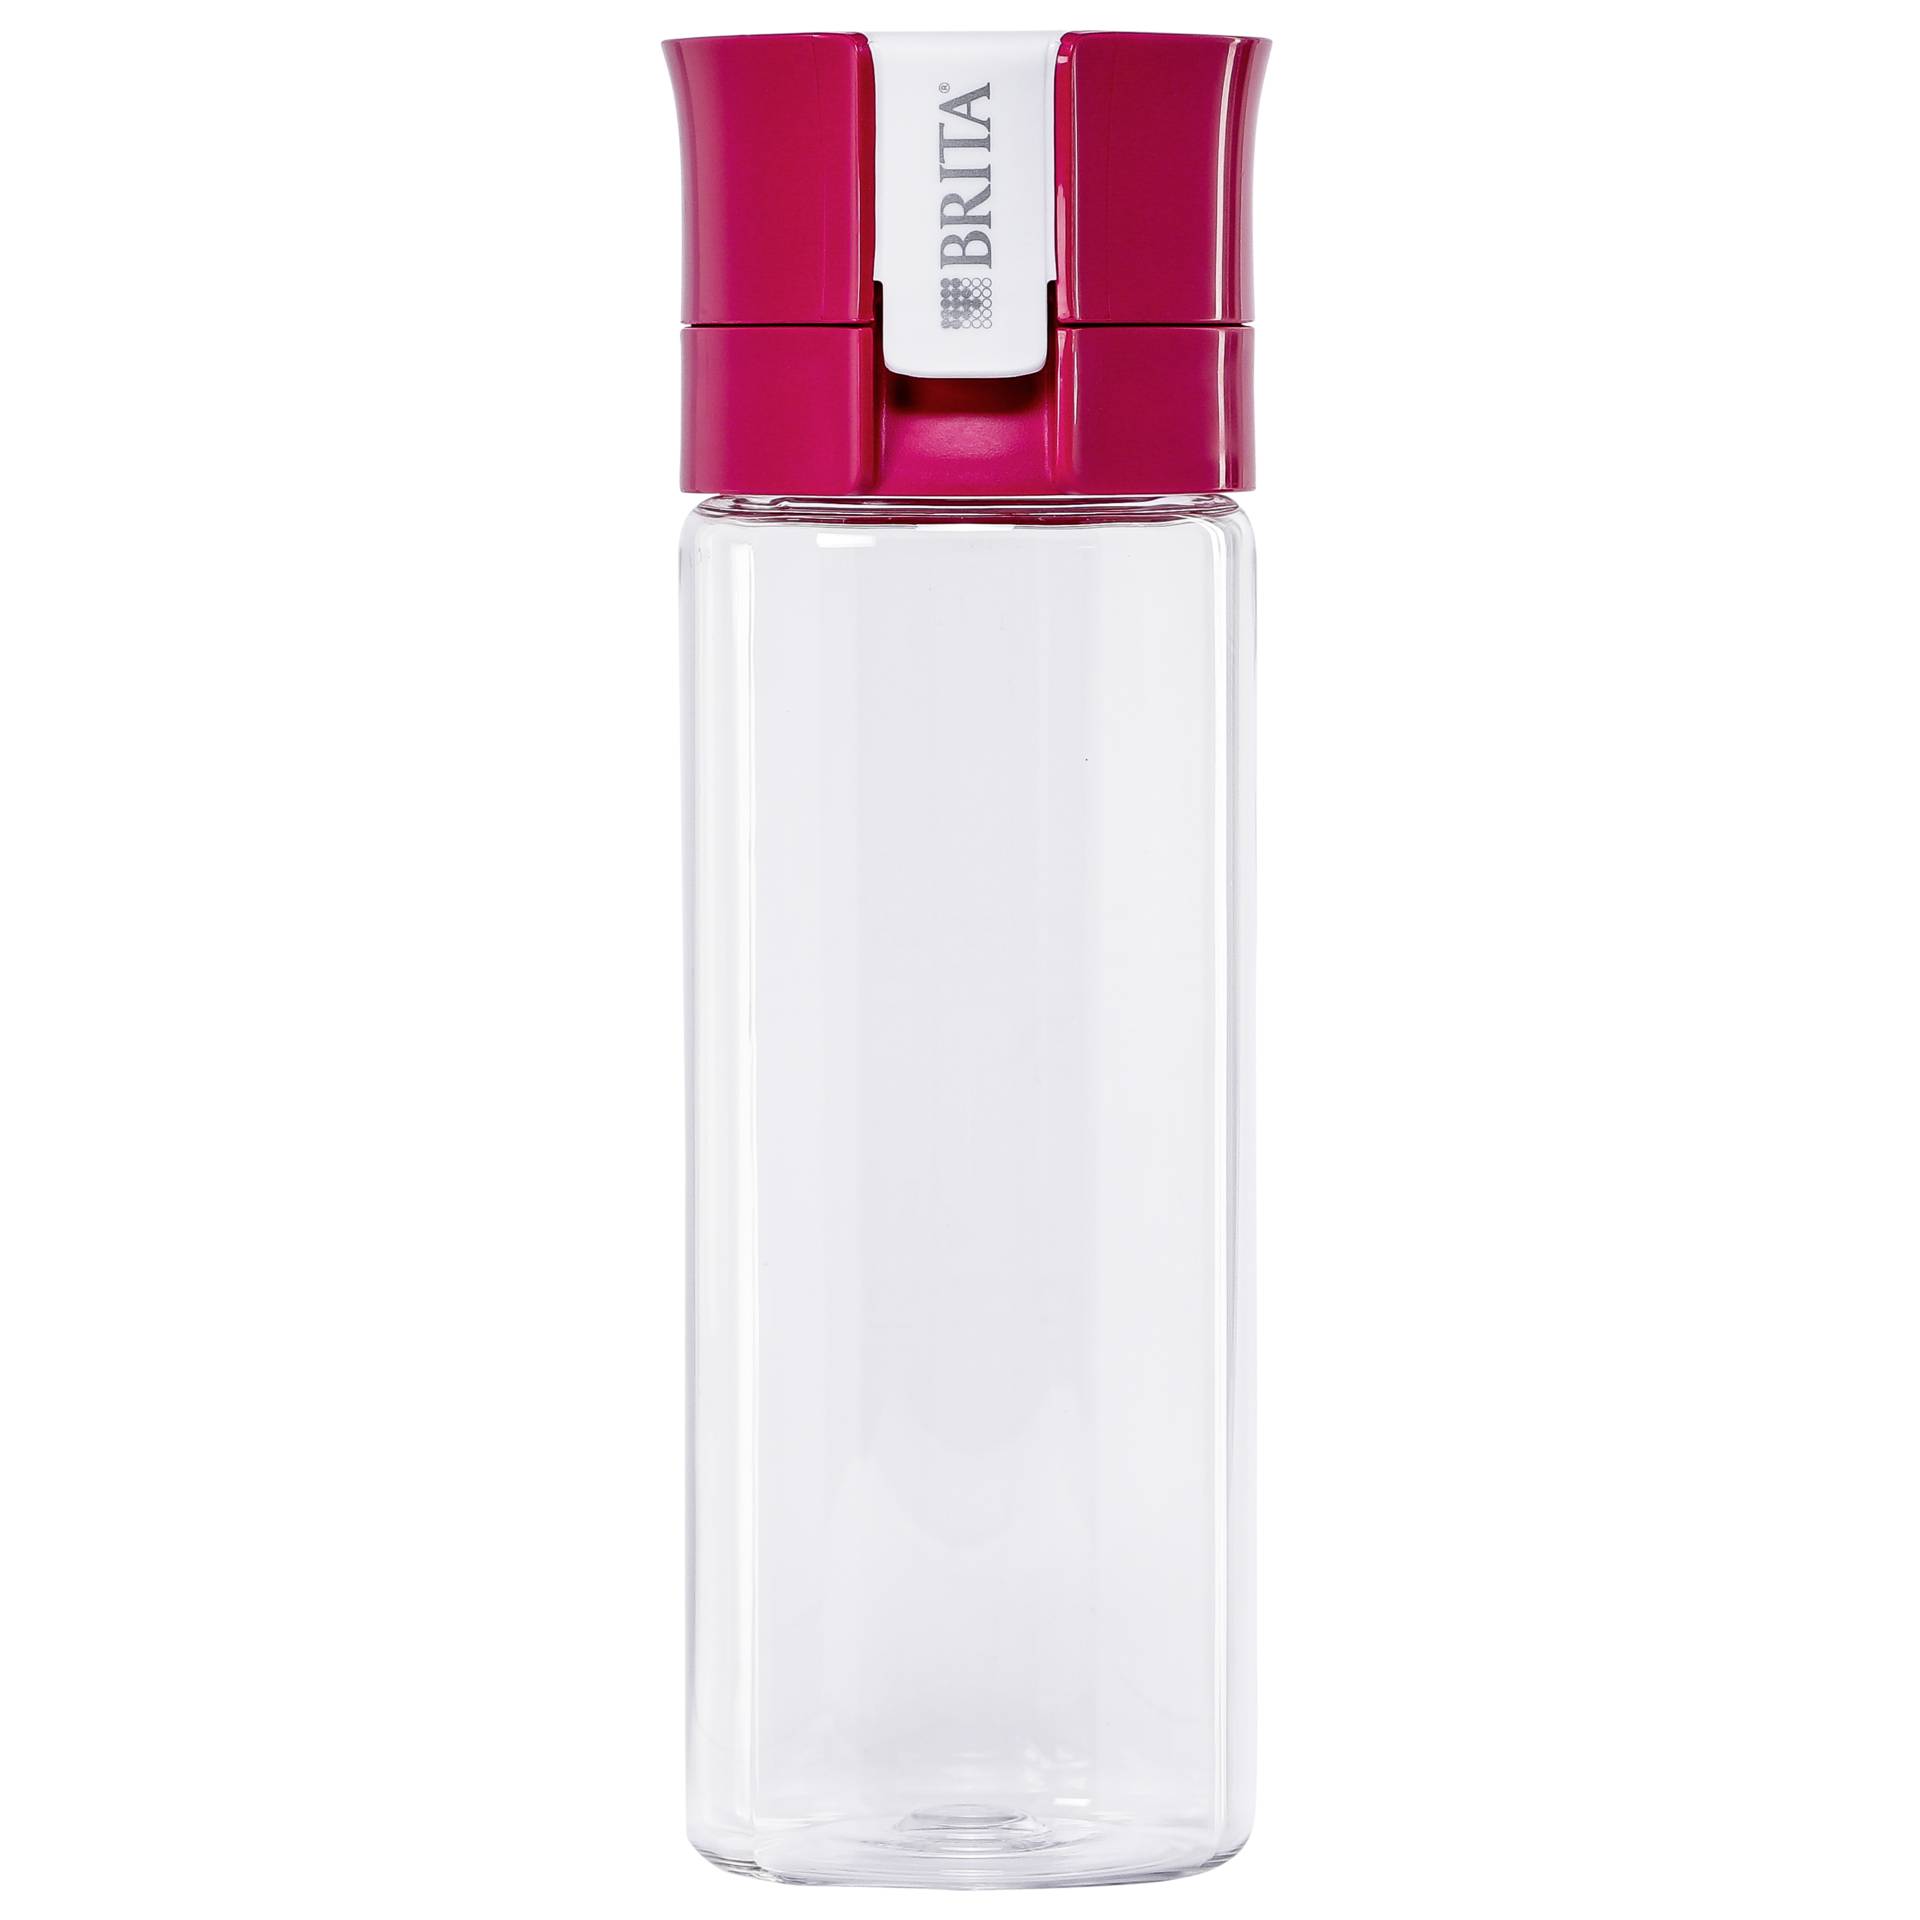 BRITA Fill and Go Vital Water Filter Bottle, Pink, Pack of 1